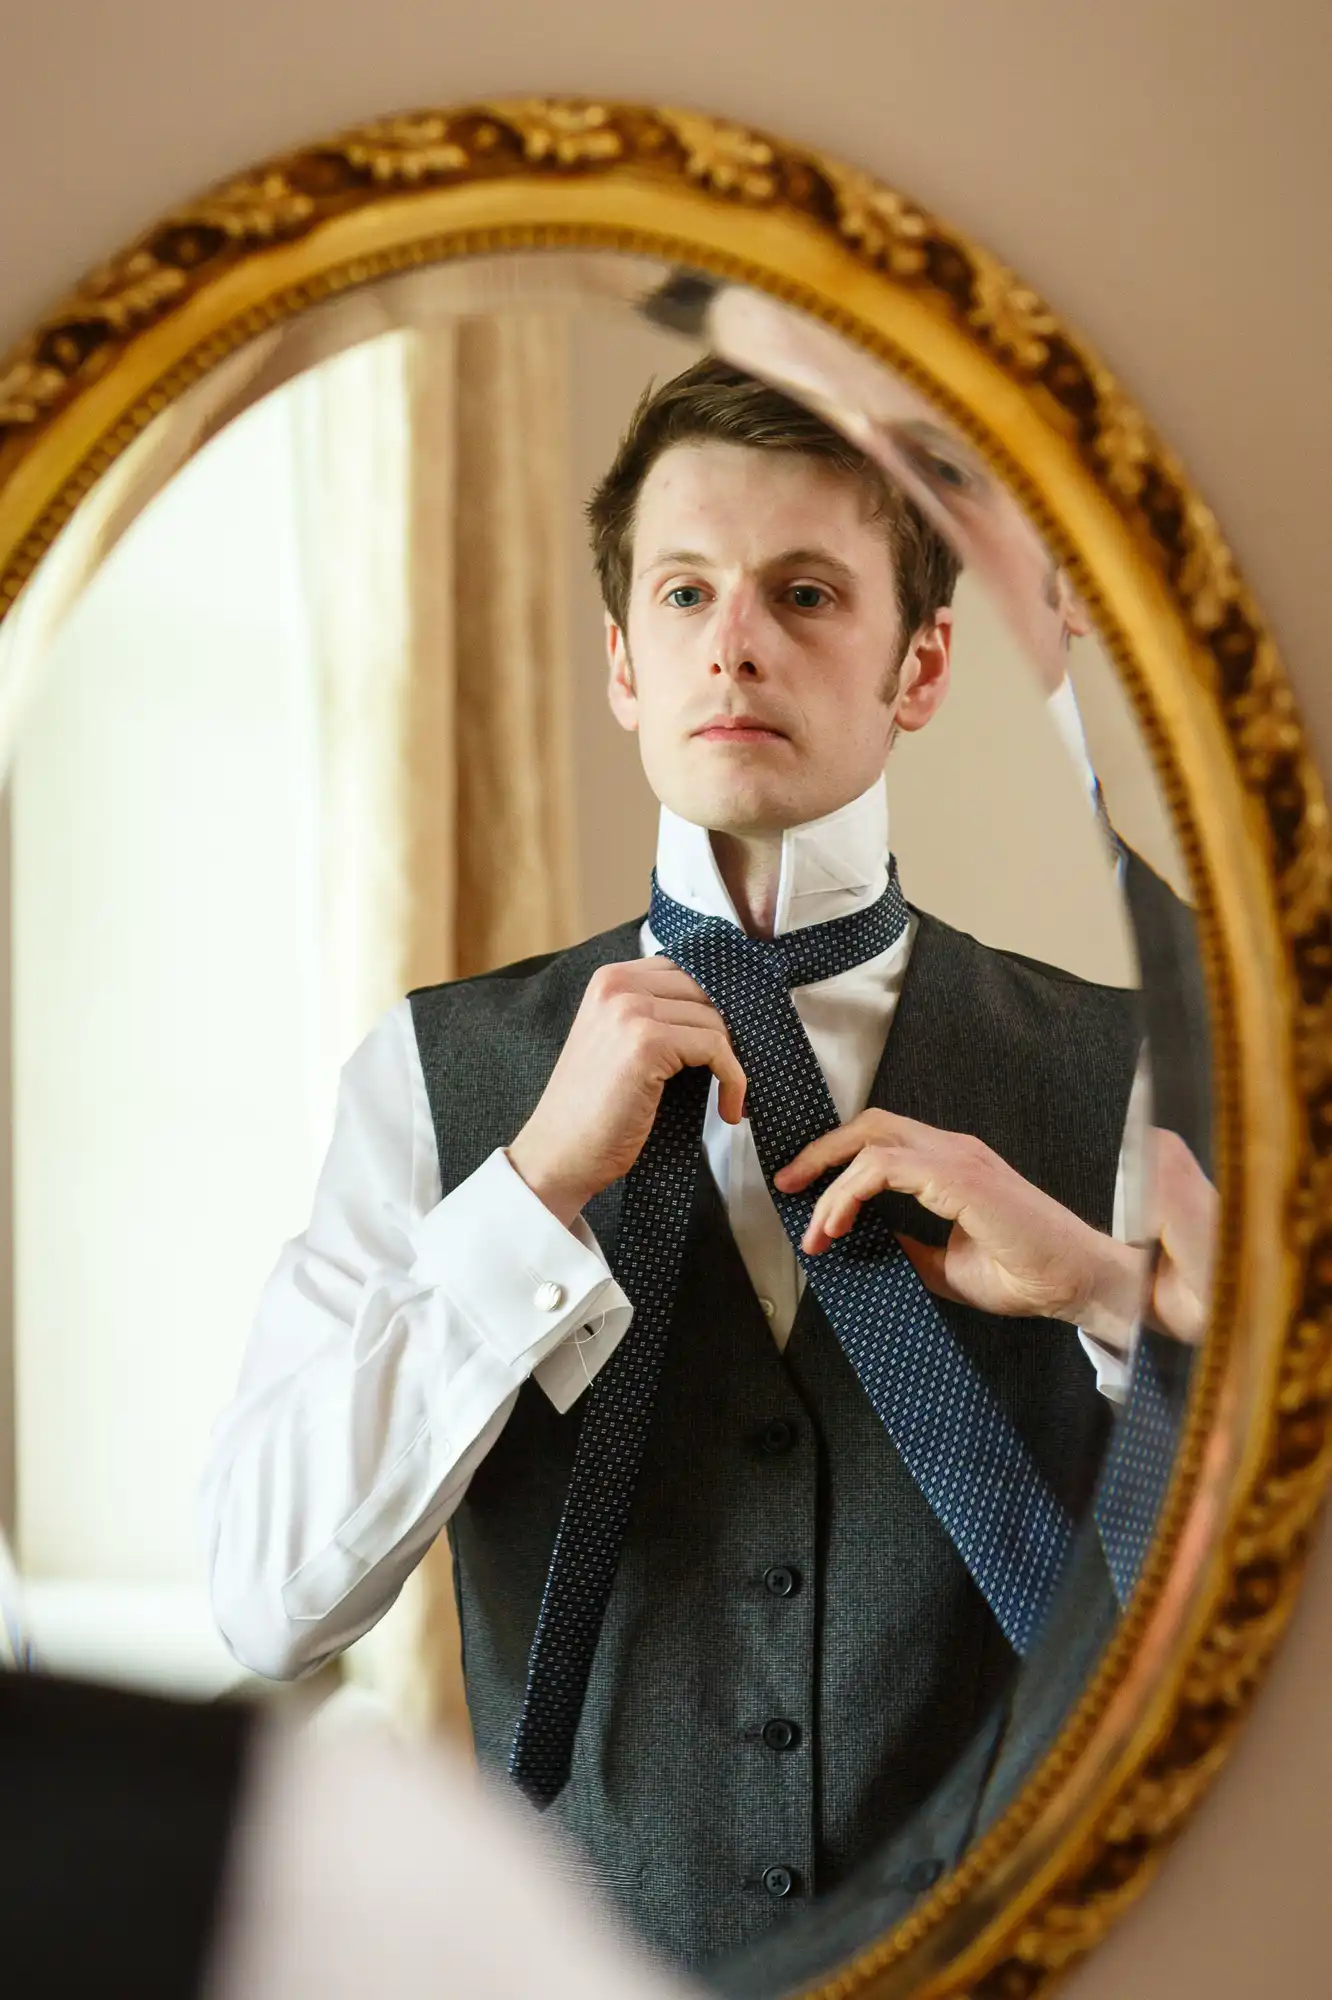 A man in a vest and dress shirt adjusts his tie while looking at himself in an ornate oval mirror.